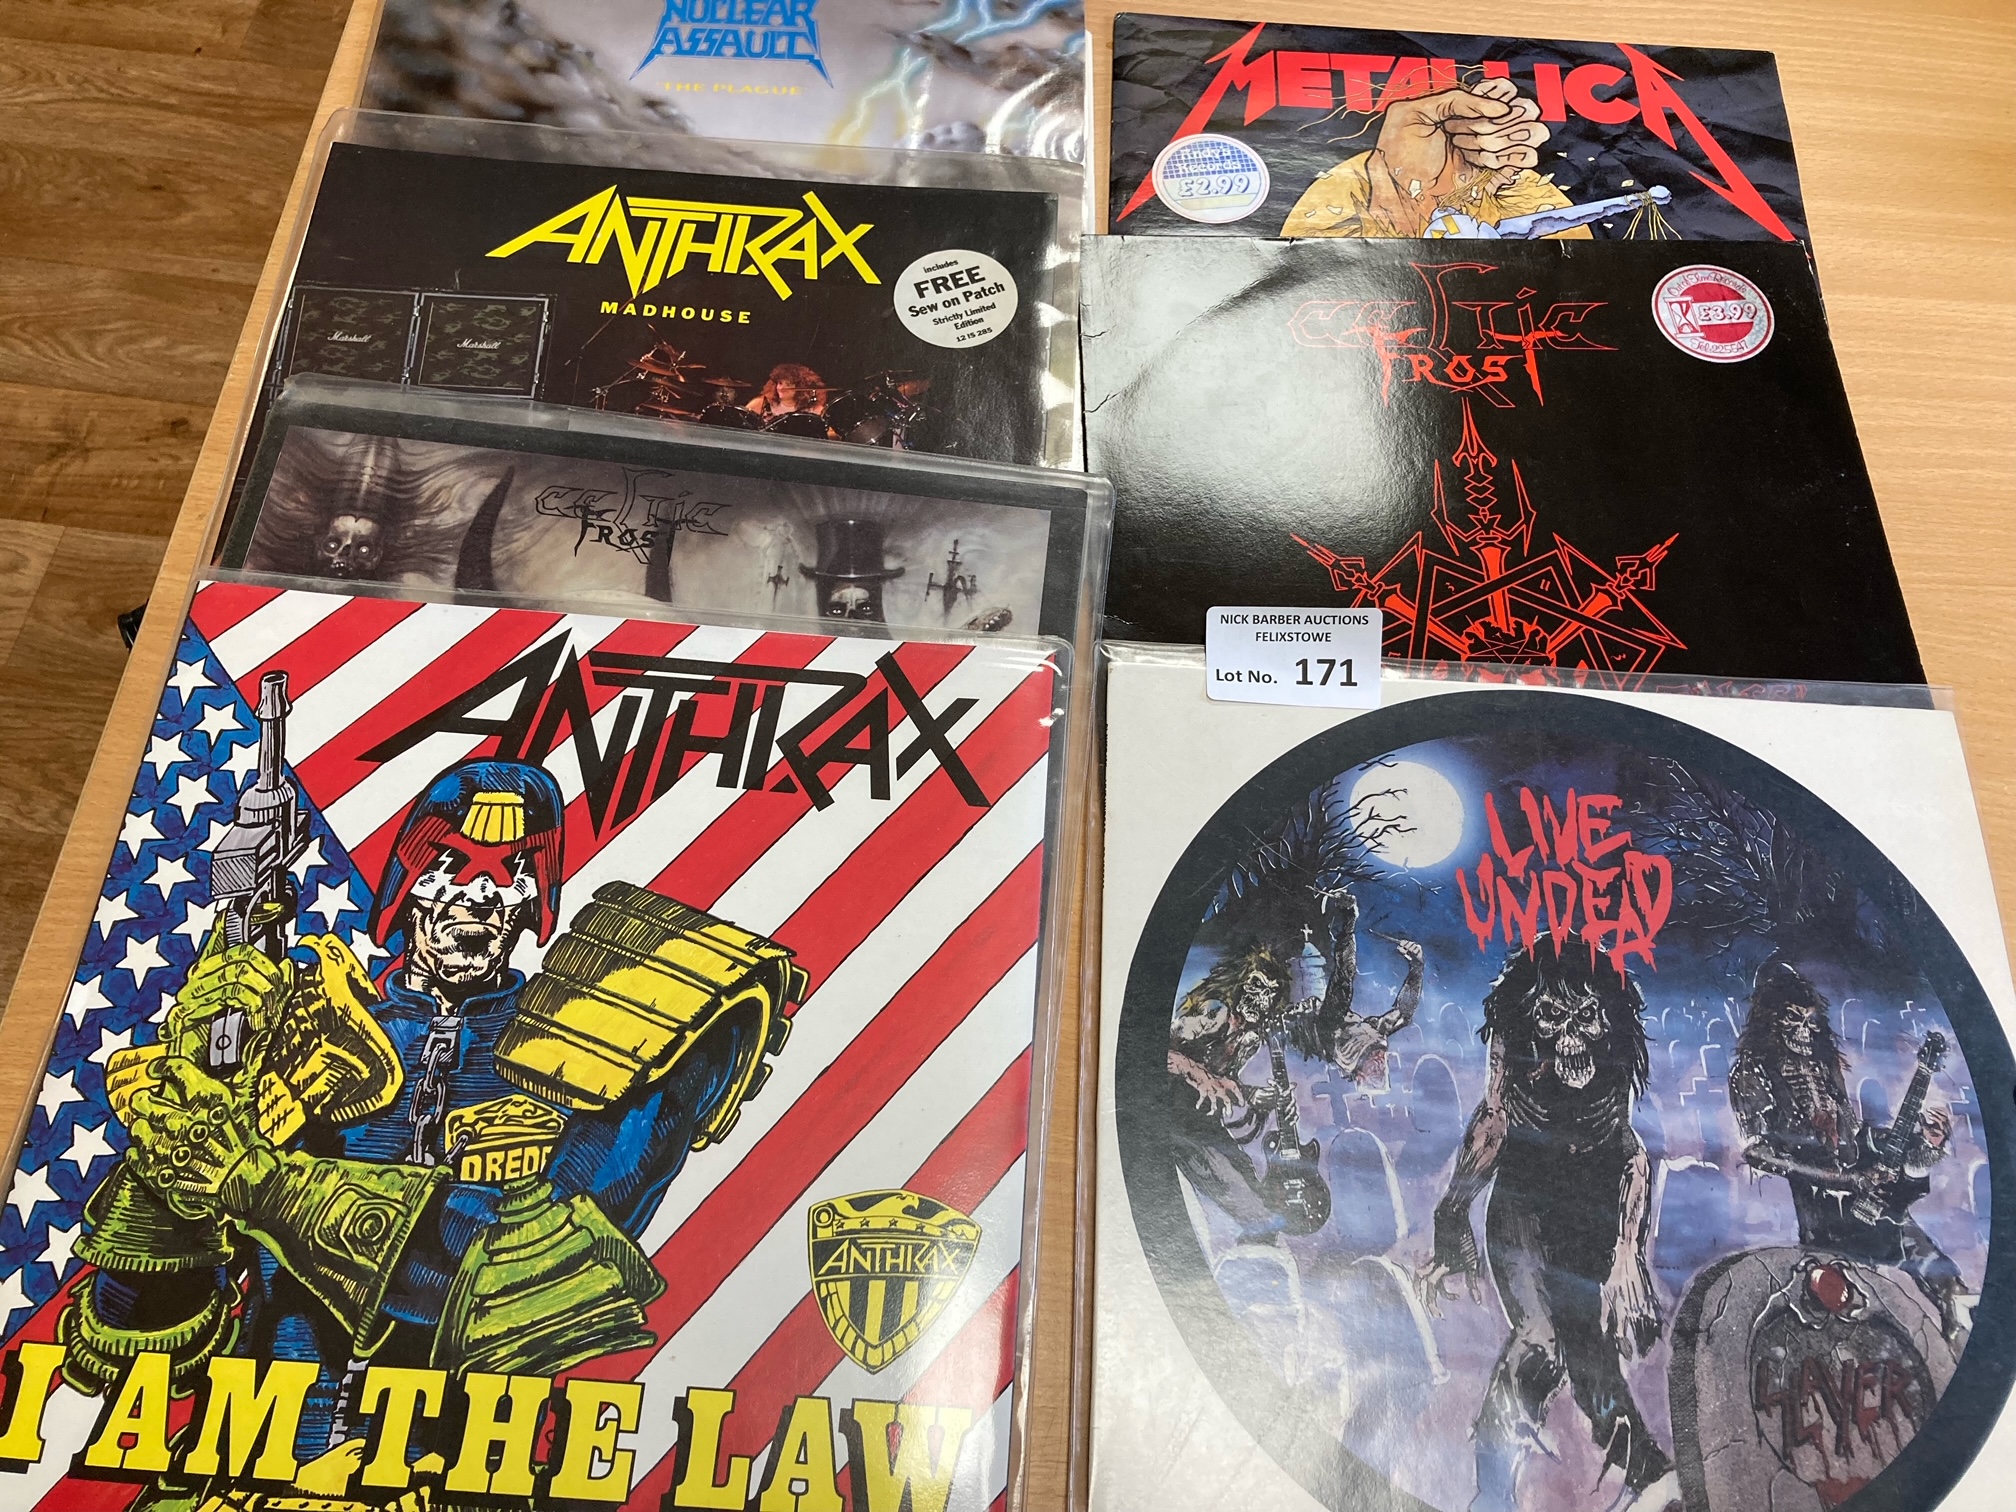 Records : Small selection of desirable Heavy Metal